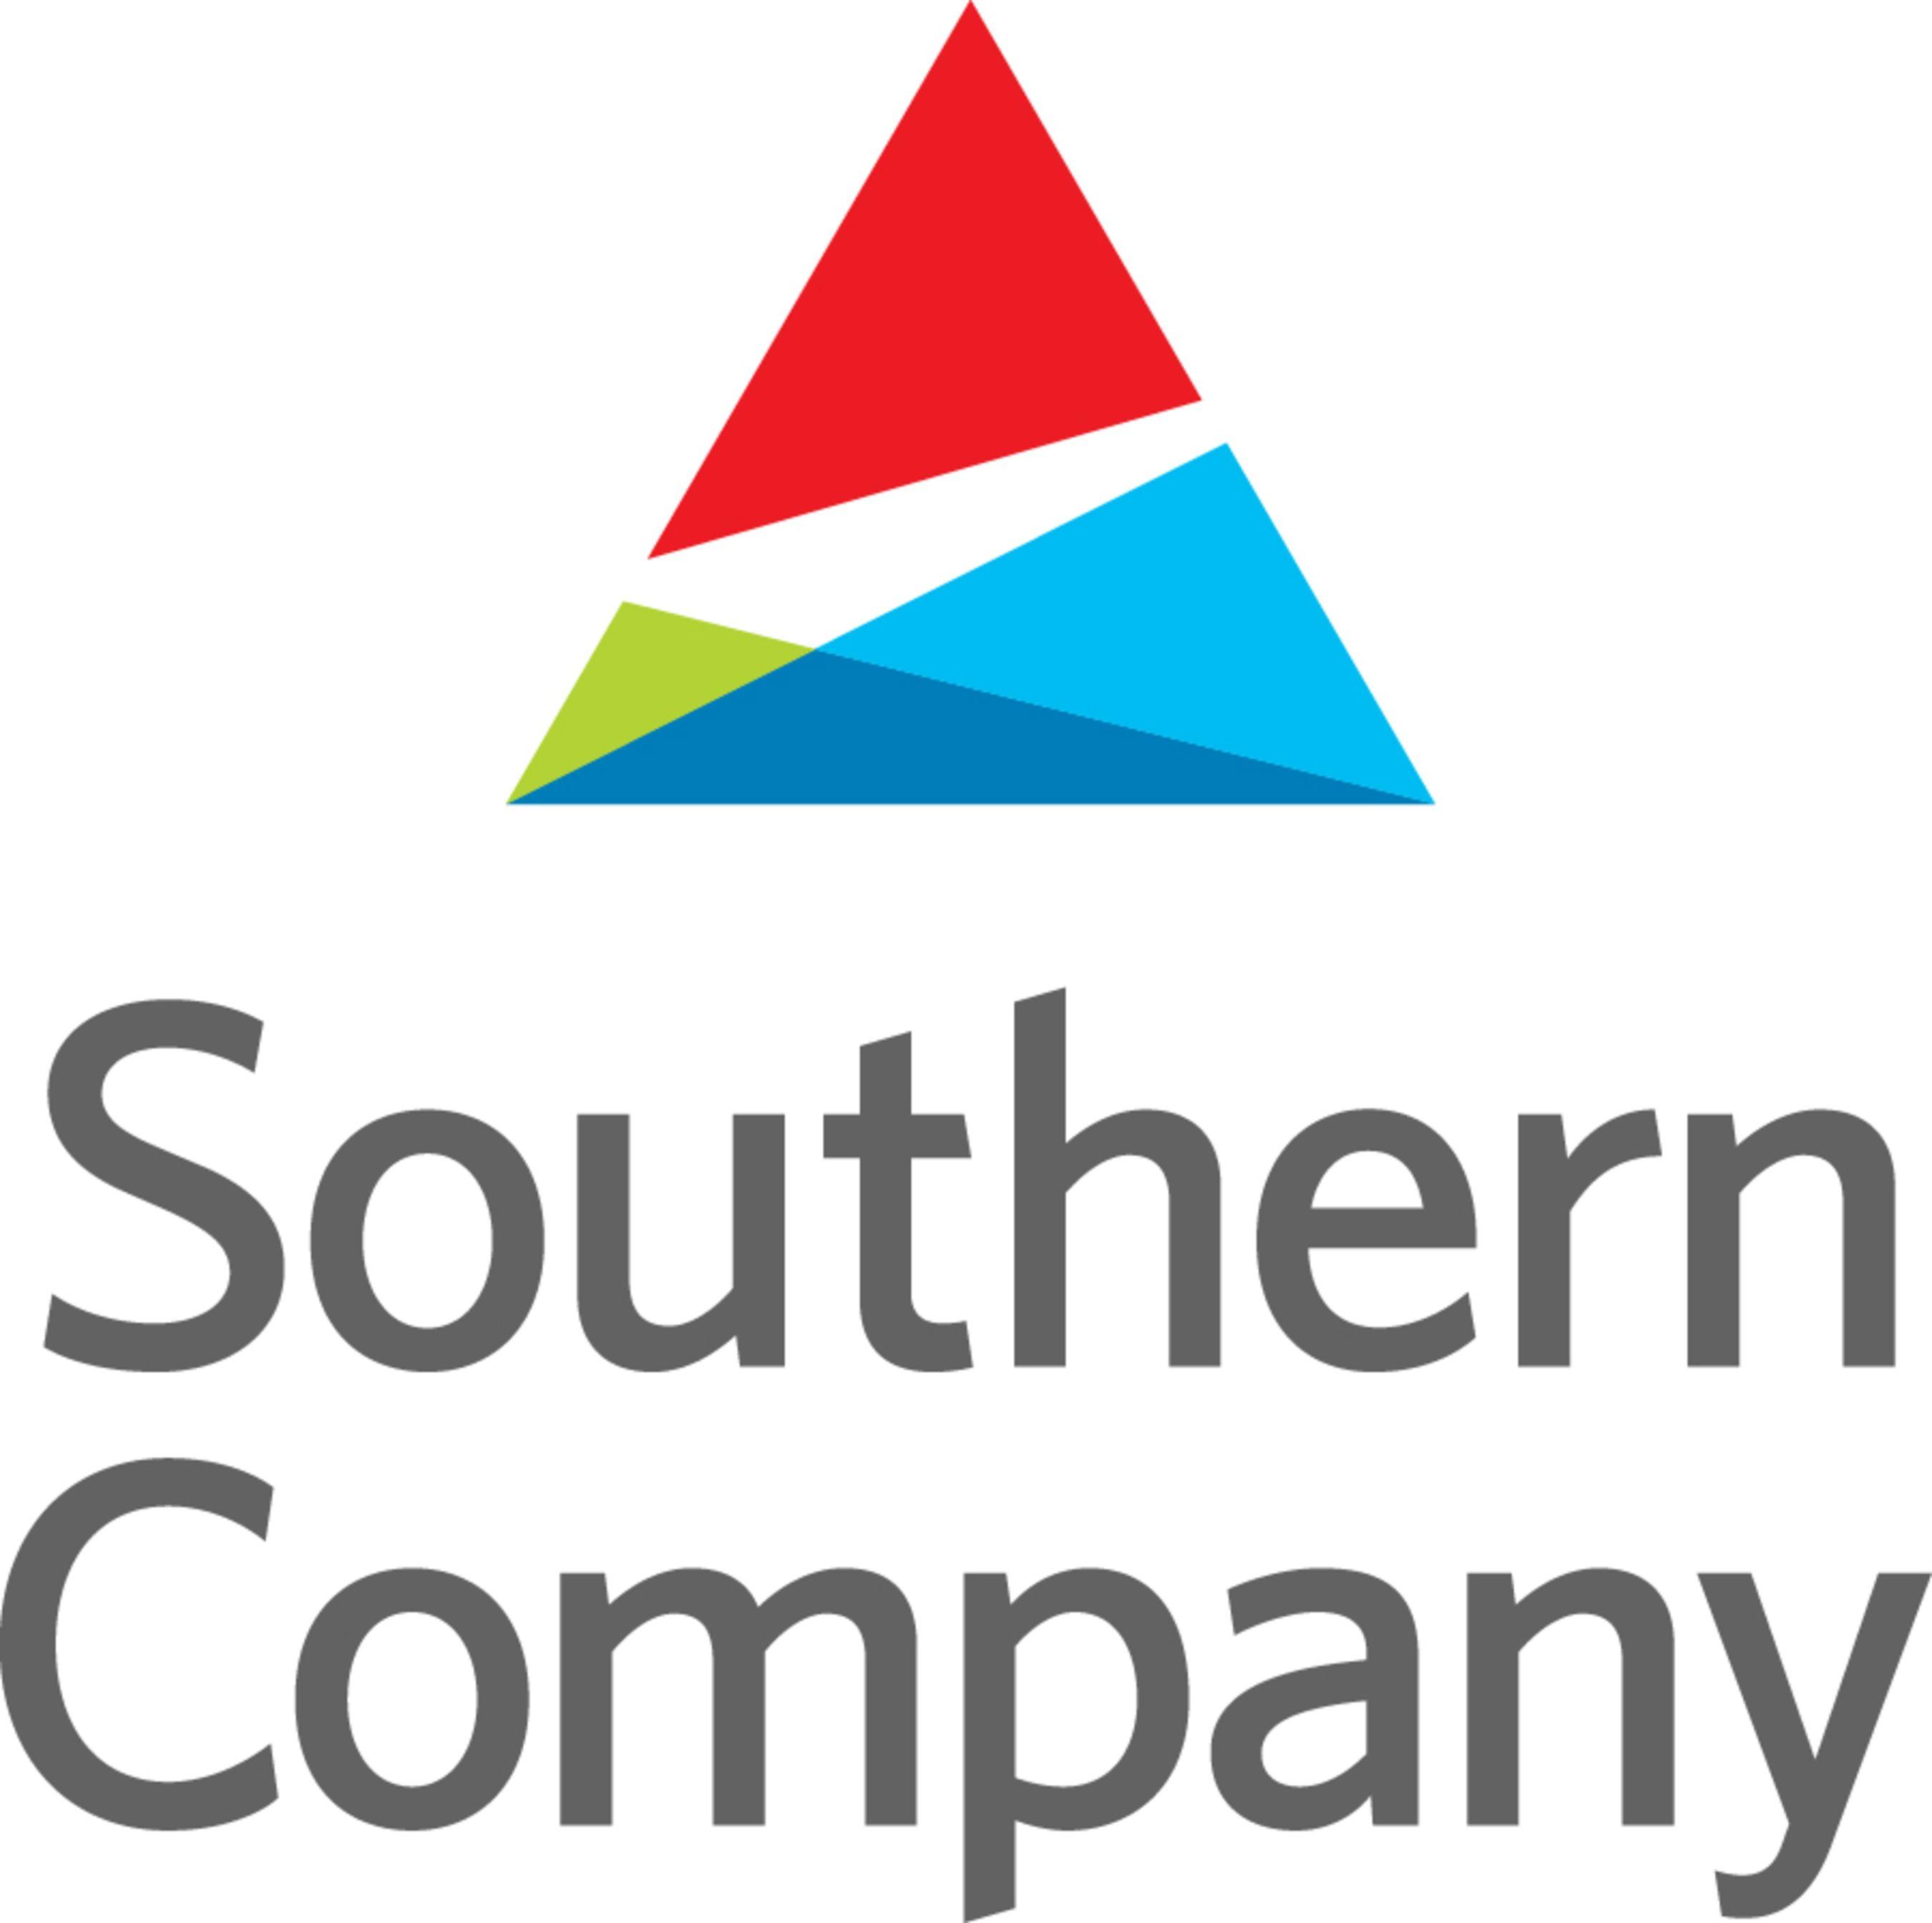 Korean Company Logo - South Korean company signs first letter of intent to explore ...